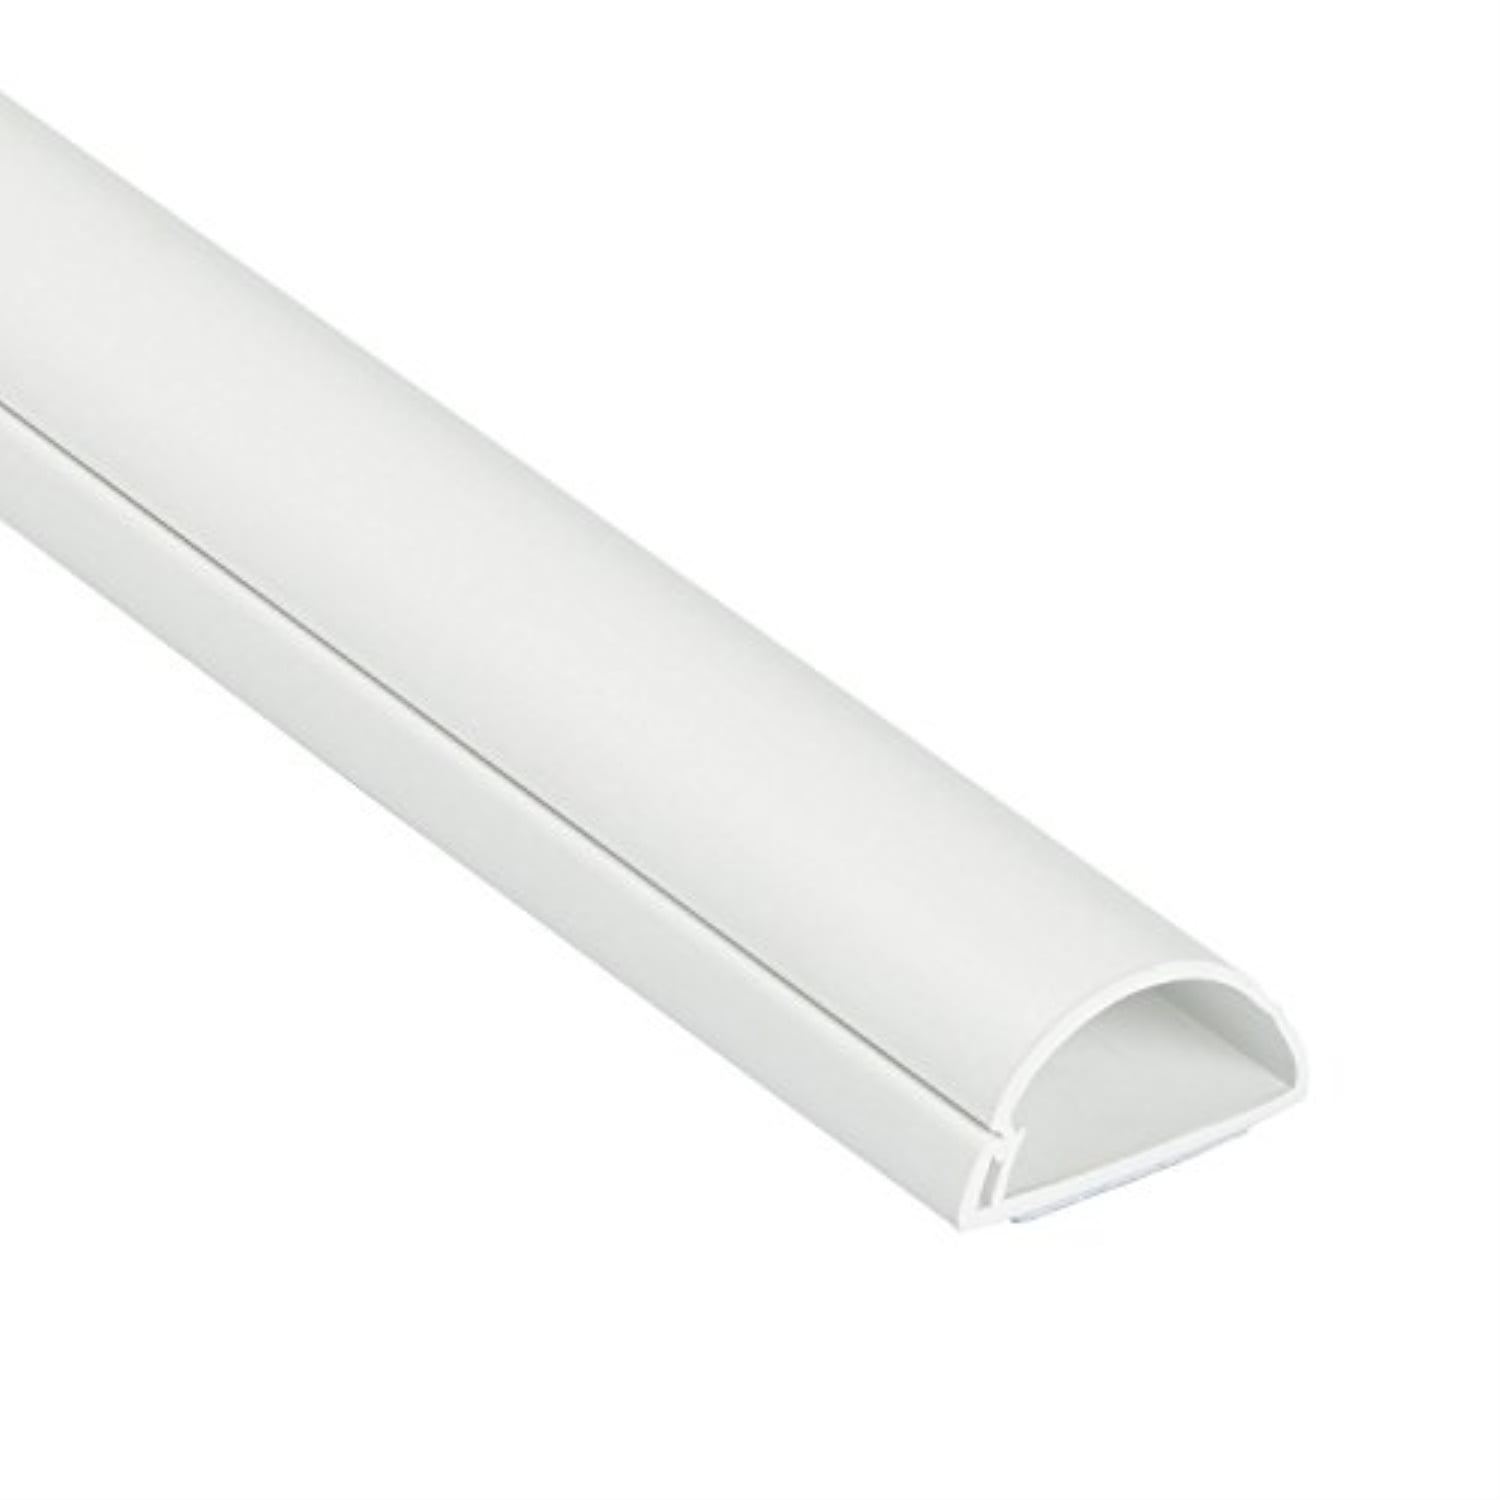 NIB Cord Concealer/Hider: 50' Of White Paintable Cable Concealer, Wire Hider  For Walls, Floors, Etc For $25 In Lakewood, CO